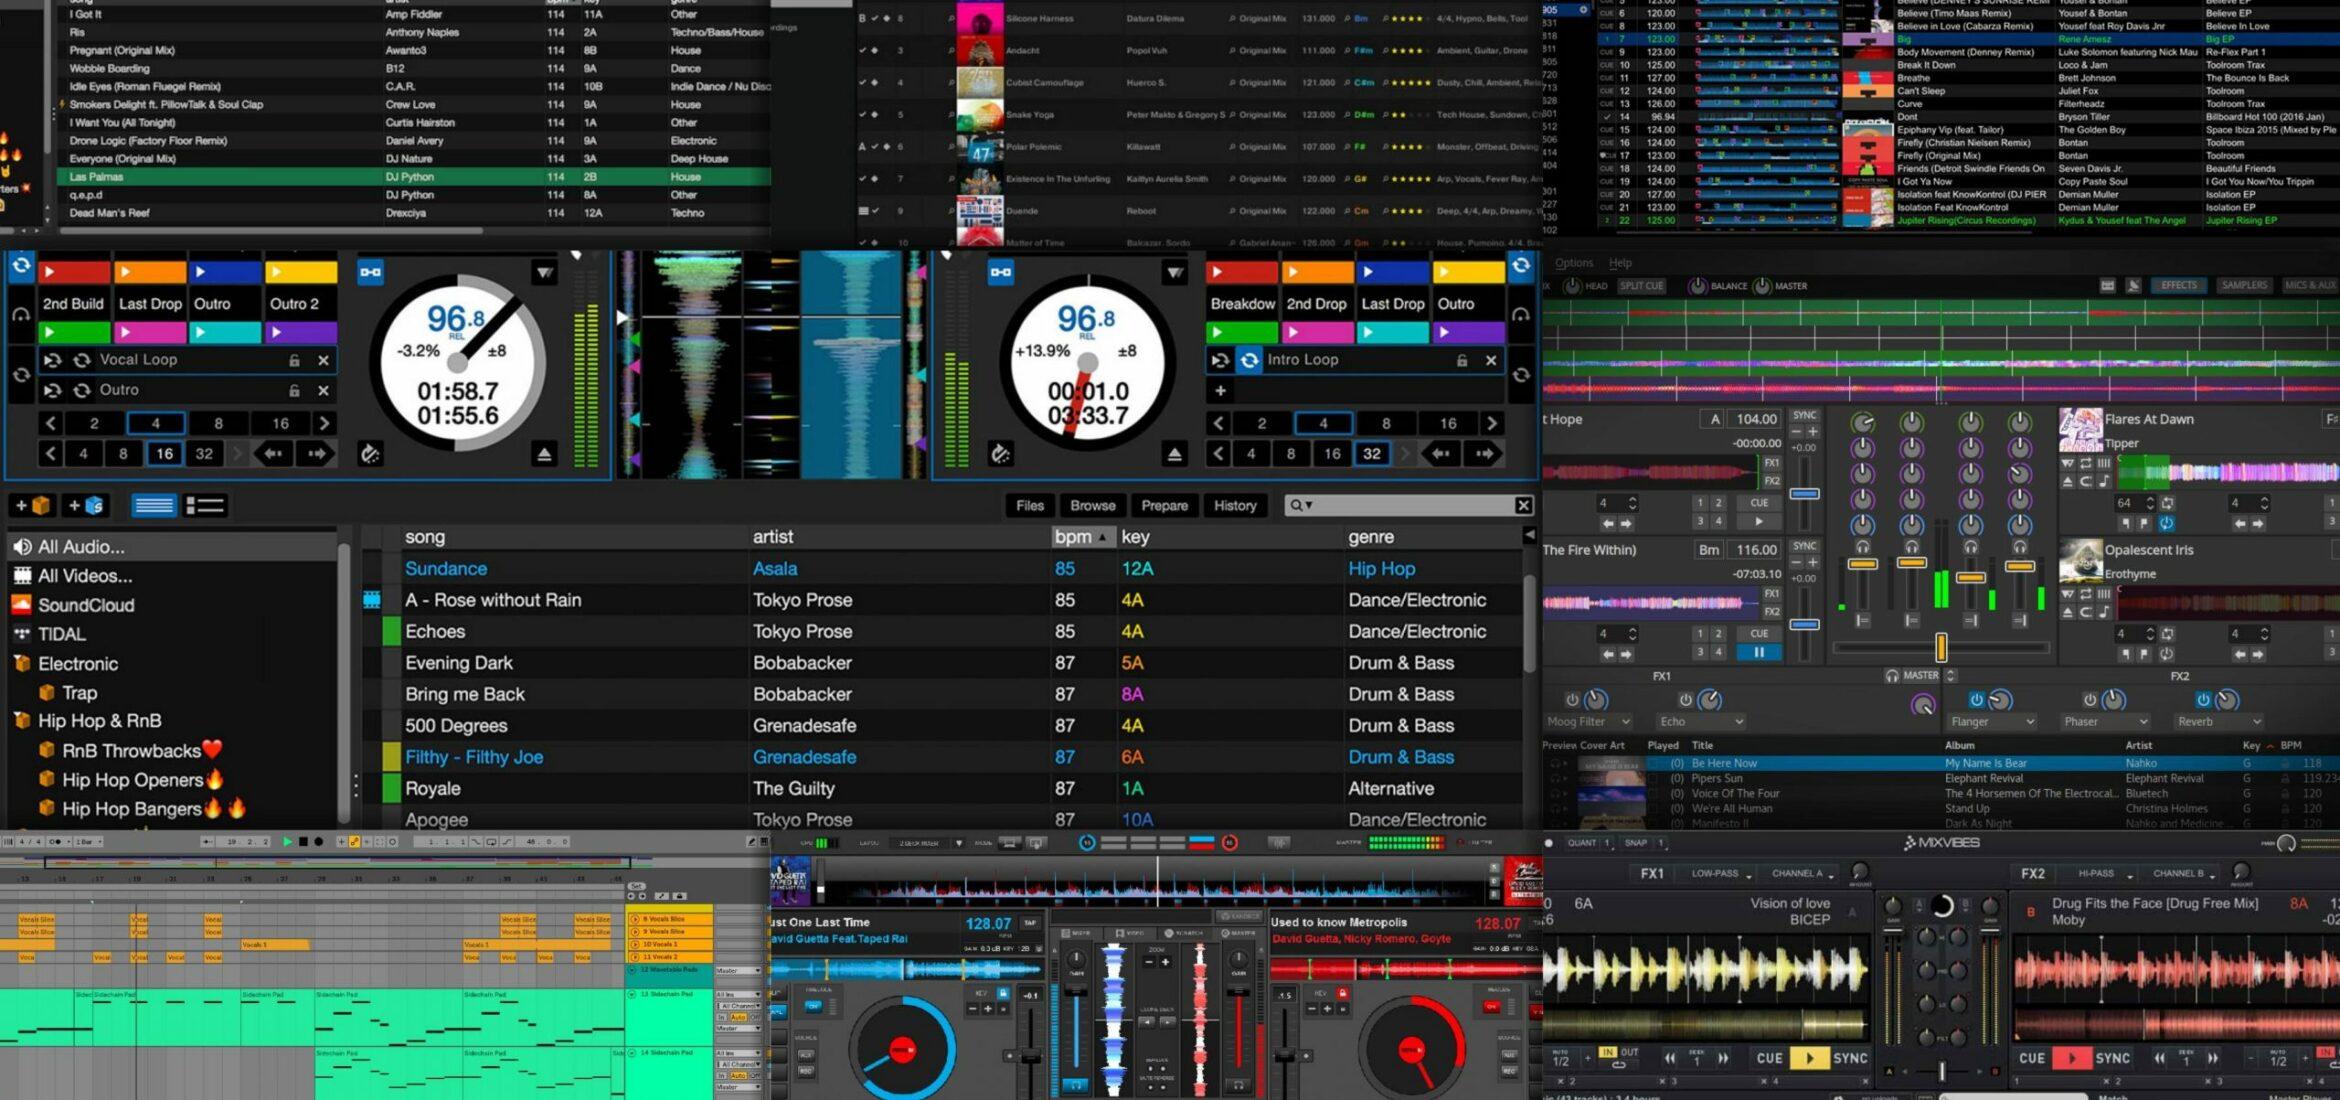 The Best DJ Software: Free and Paid